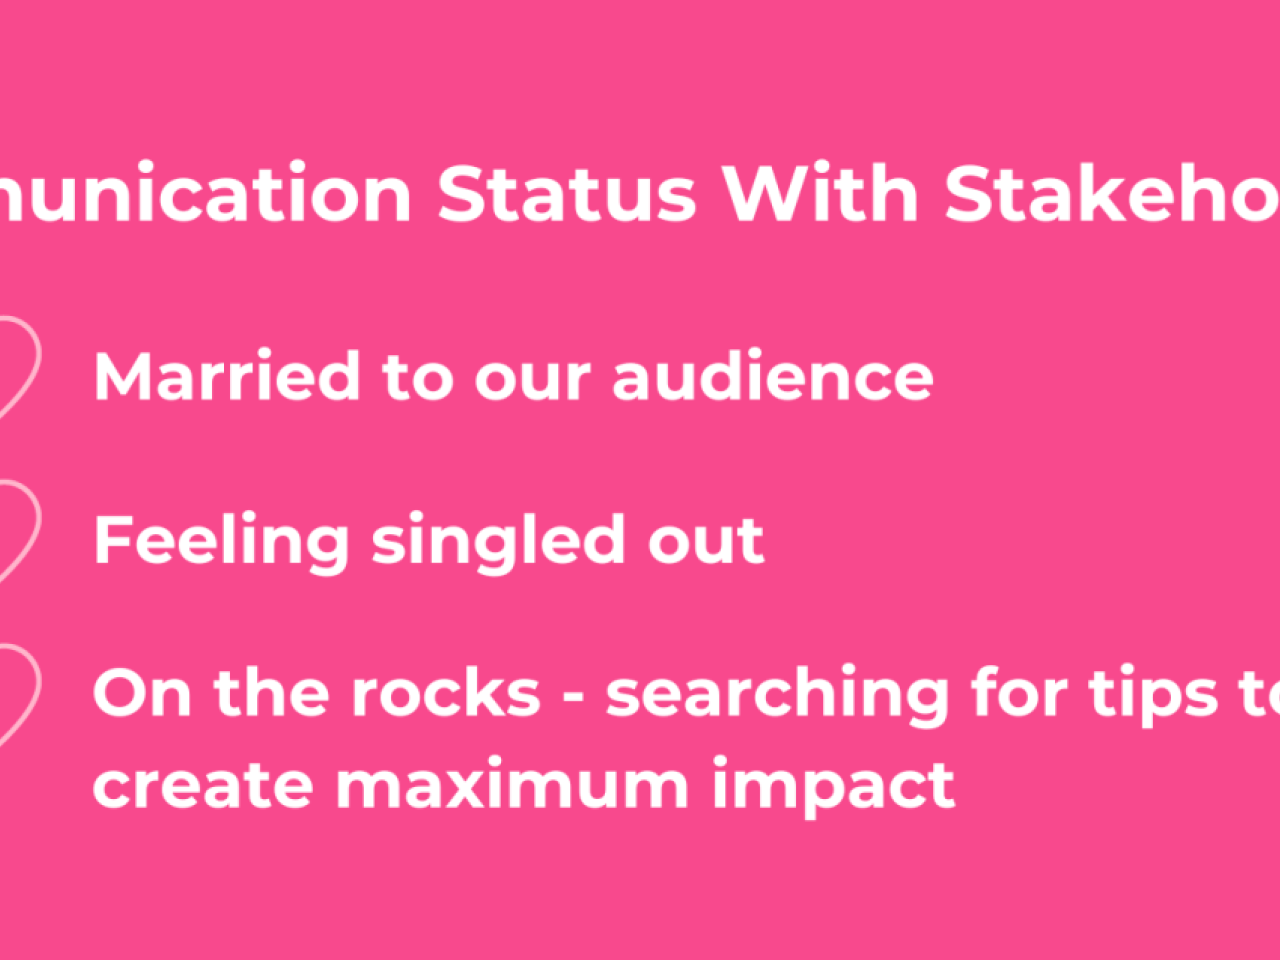 Communication Status With Stakeholders: Married to our audience, Feeling singled out, On the rocks - searching for tips to create maximum impact